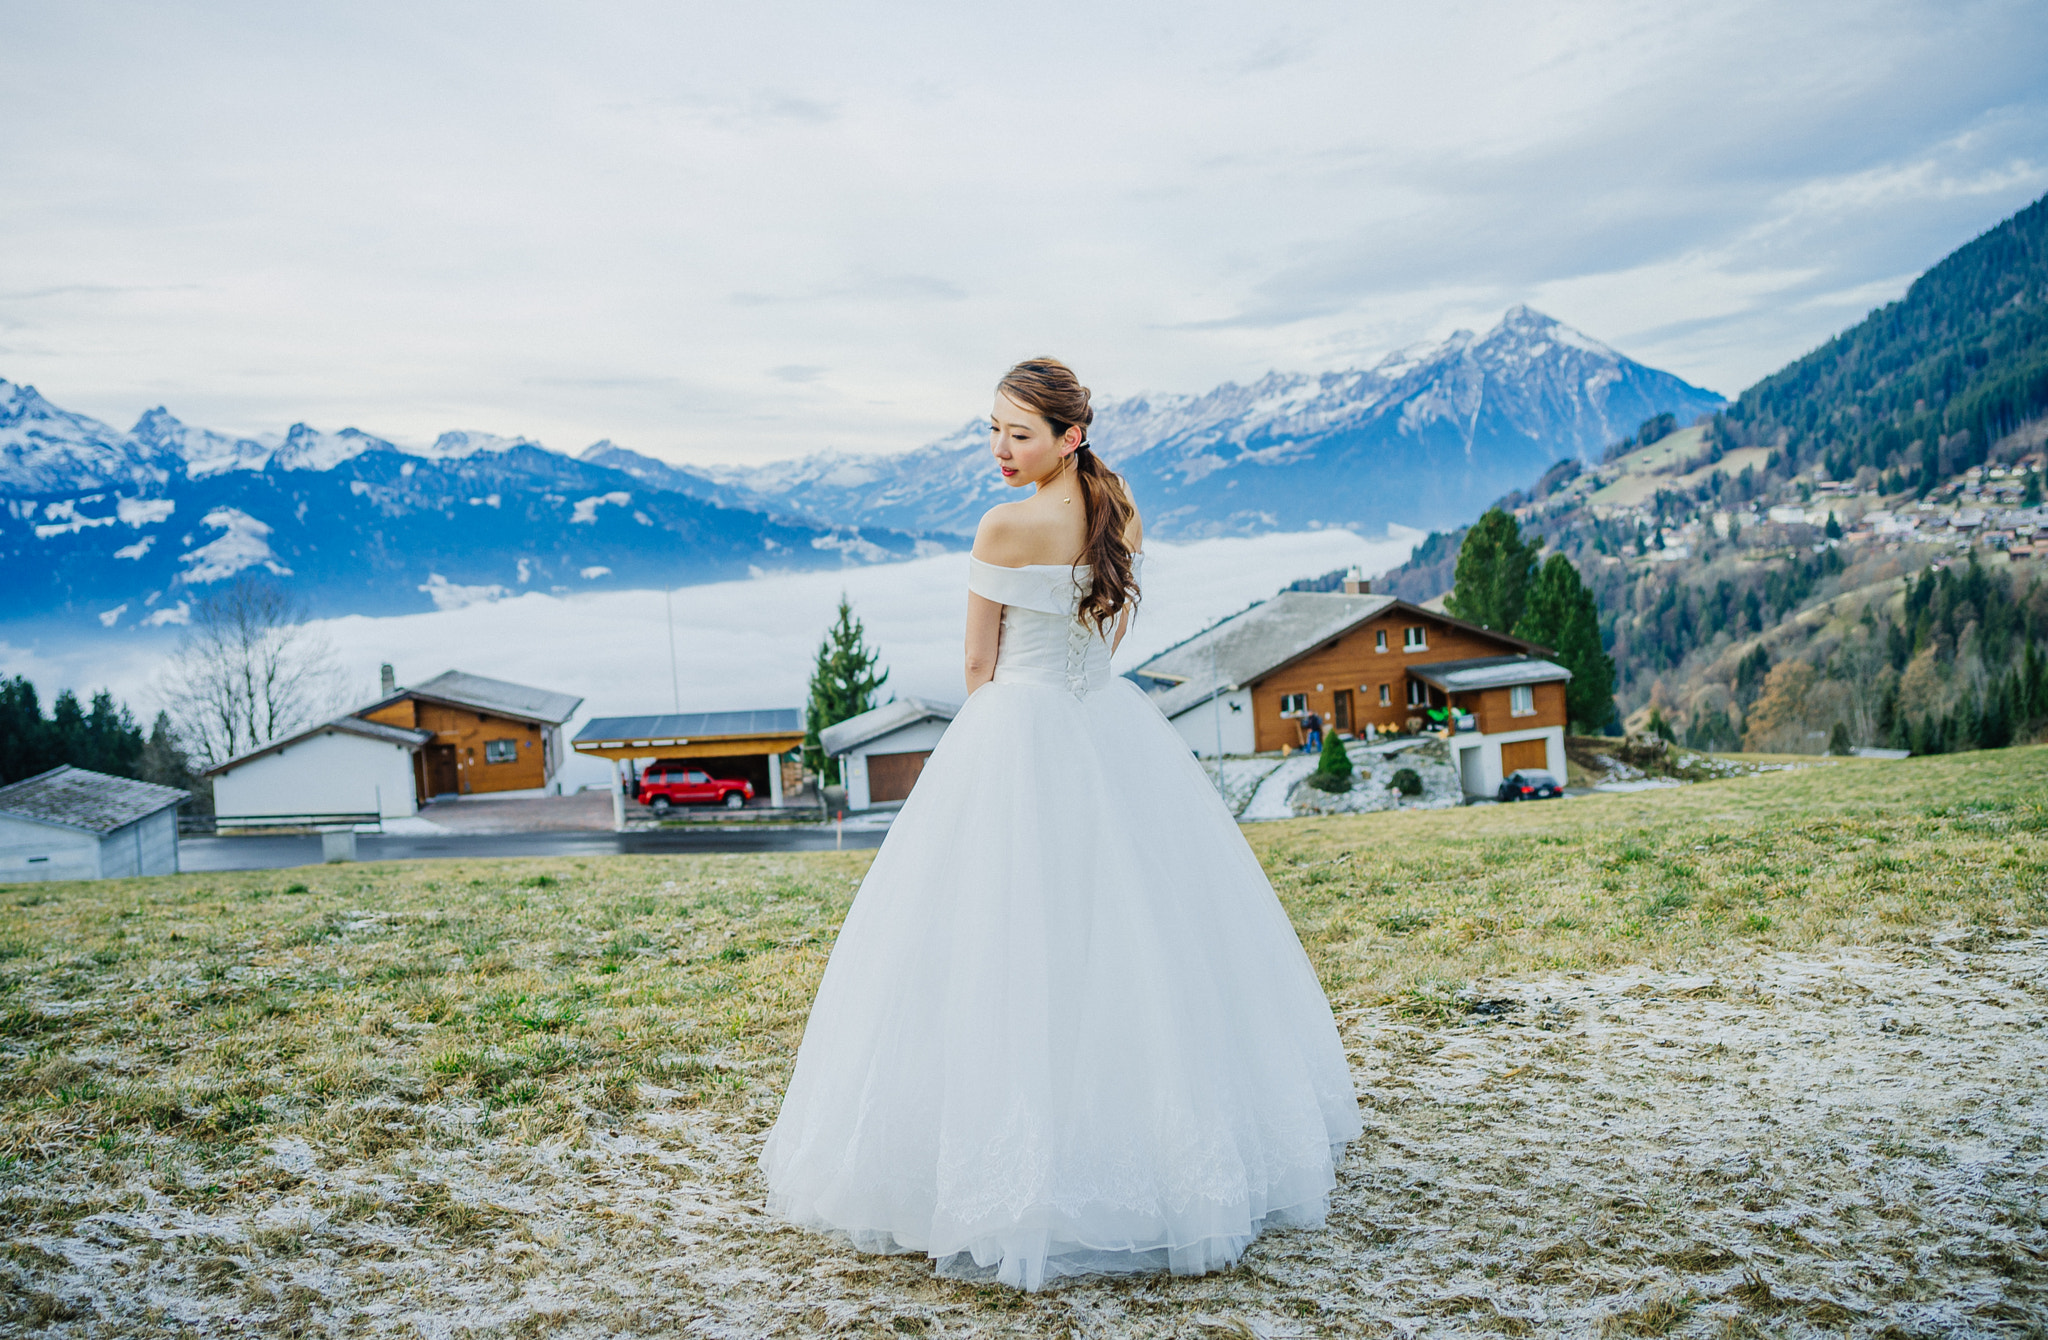 Pentax 645D sample photo. Wedding in winter mountains photography